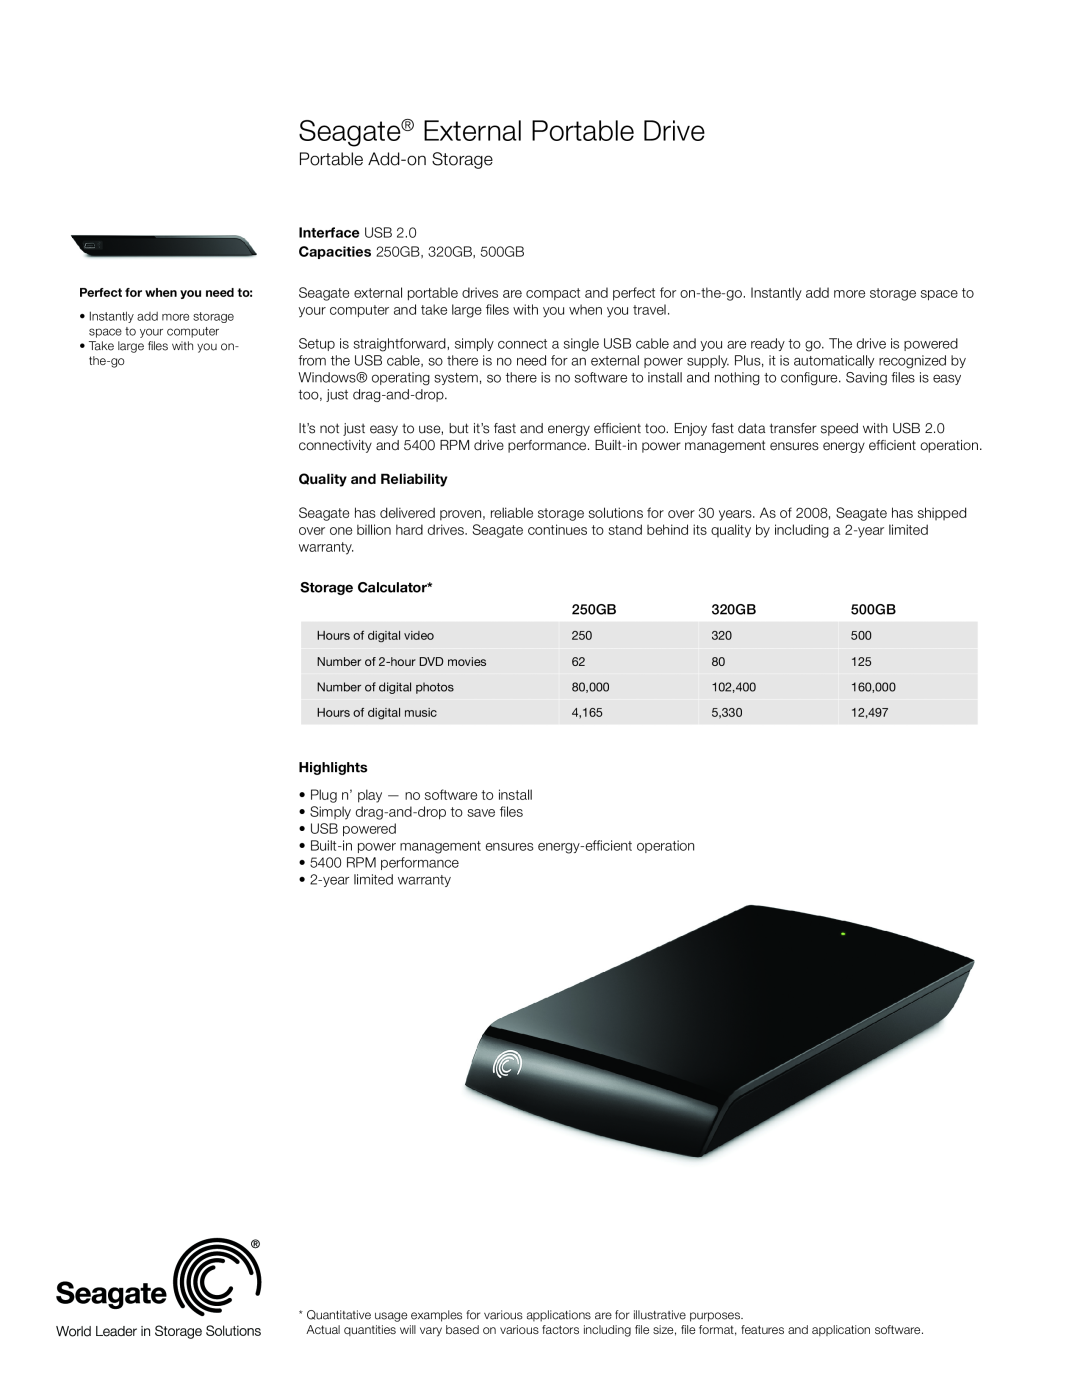 Seagate ST905004EXA101-RK warranty Seagate External Portable Drive, Portable Add-on Storage, Interface USB, Highlights 